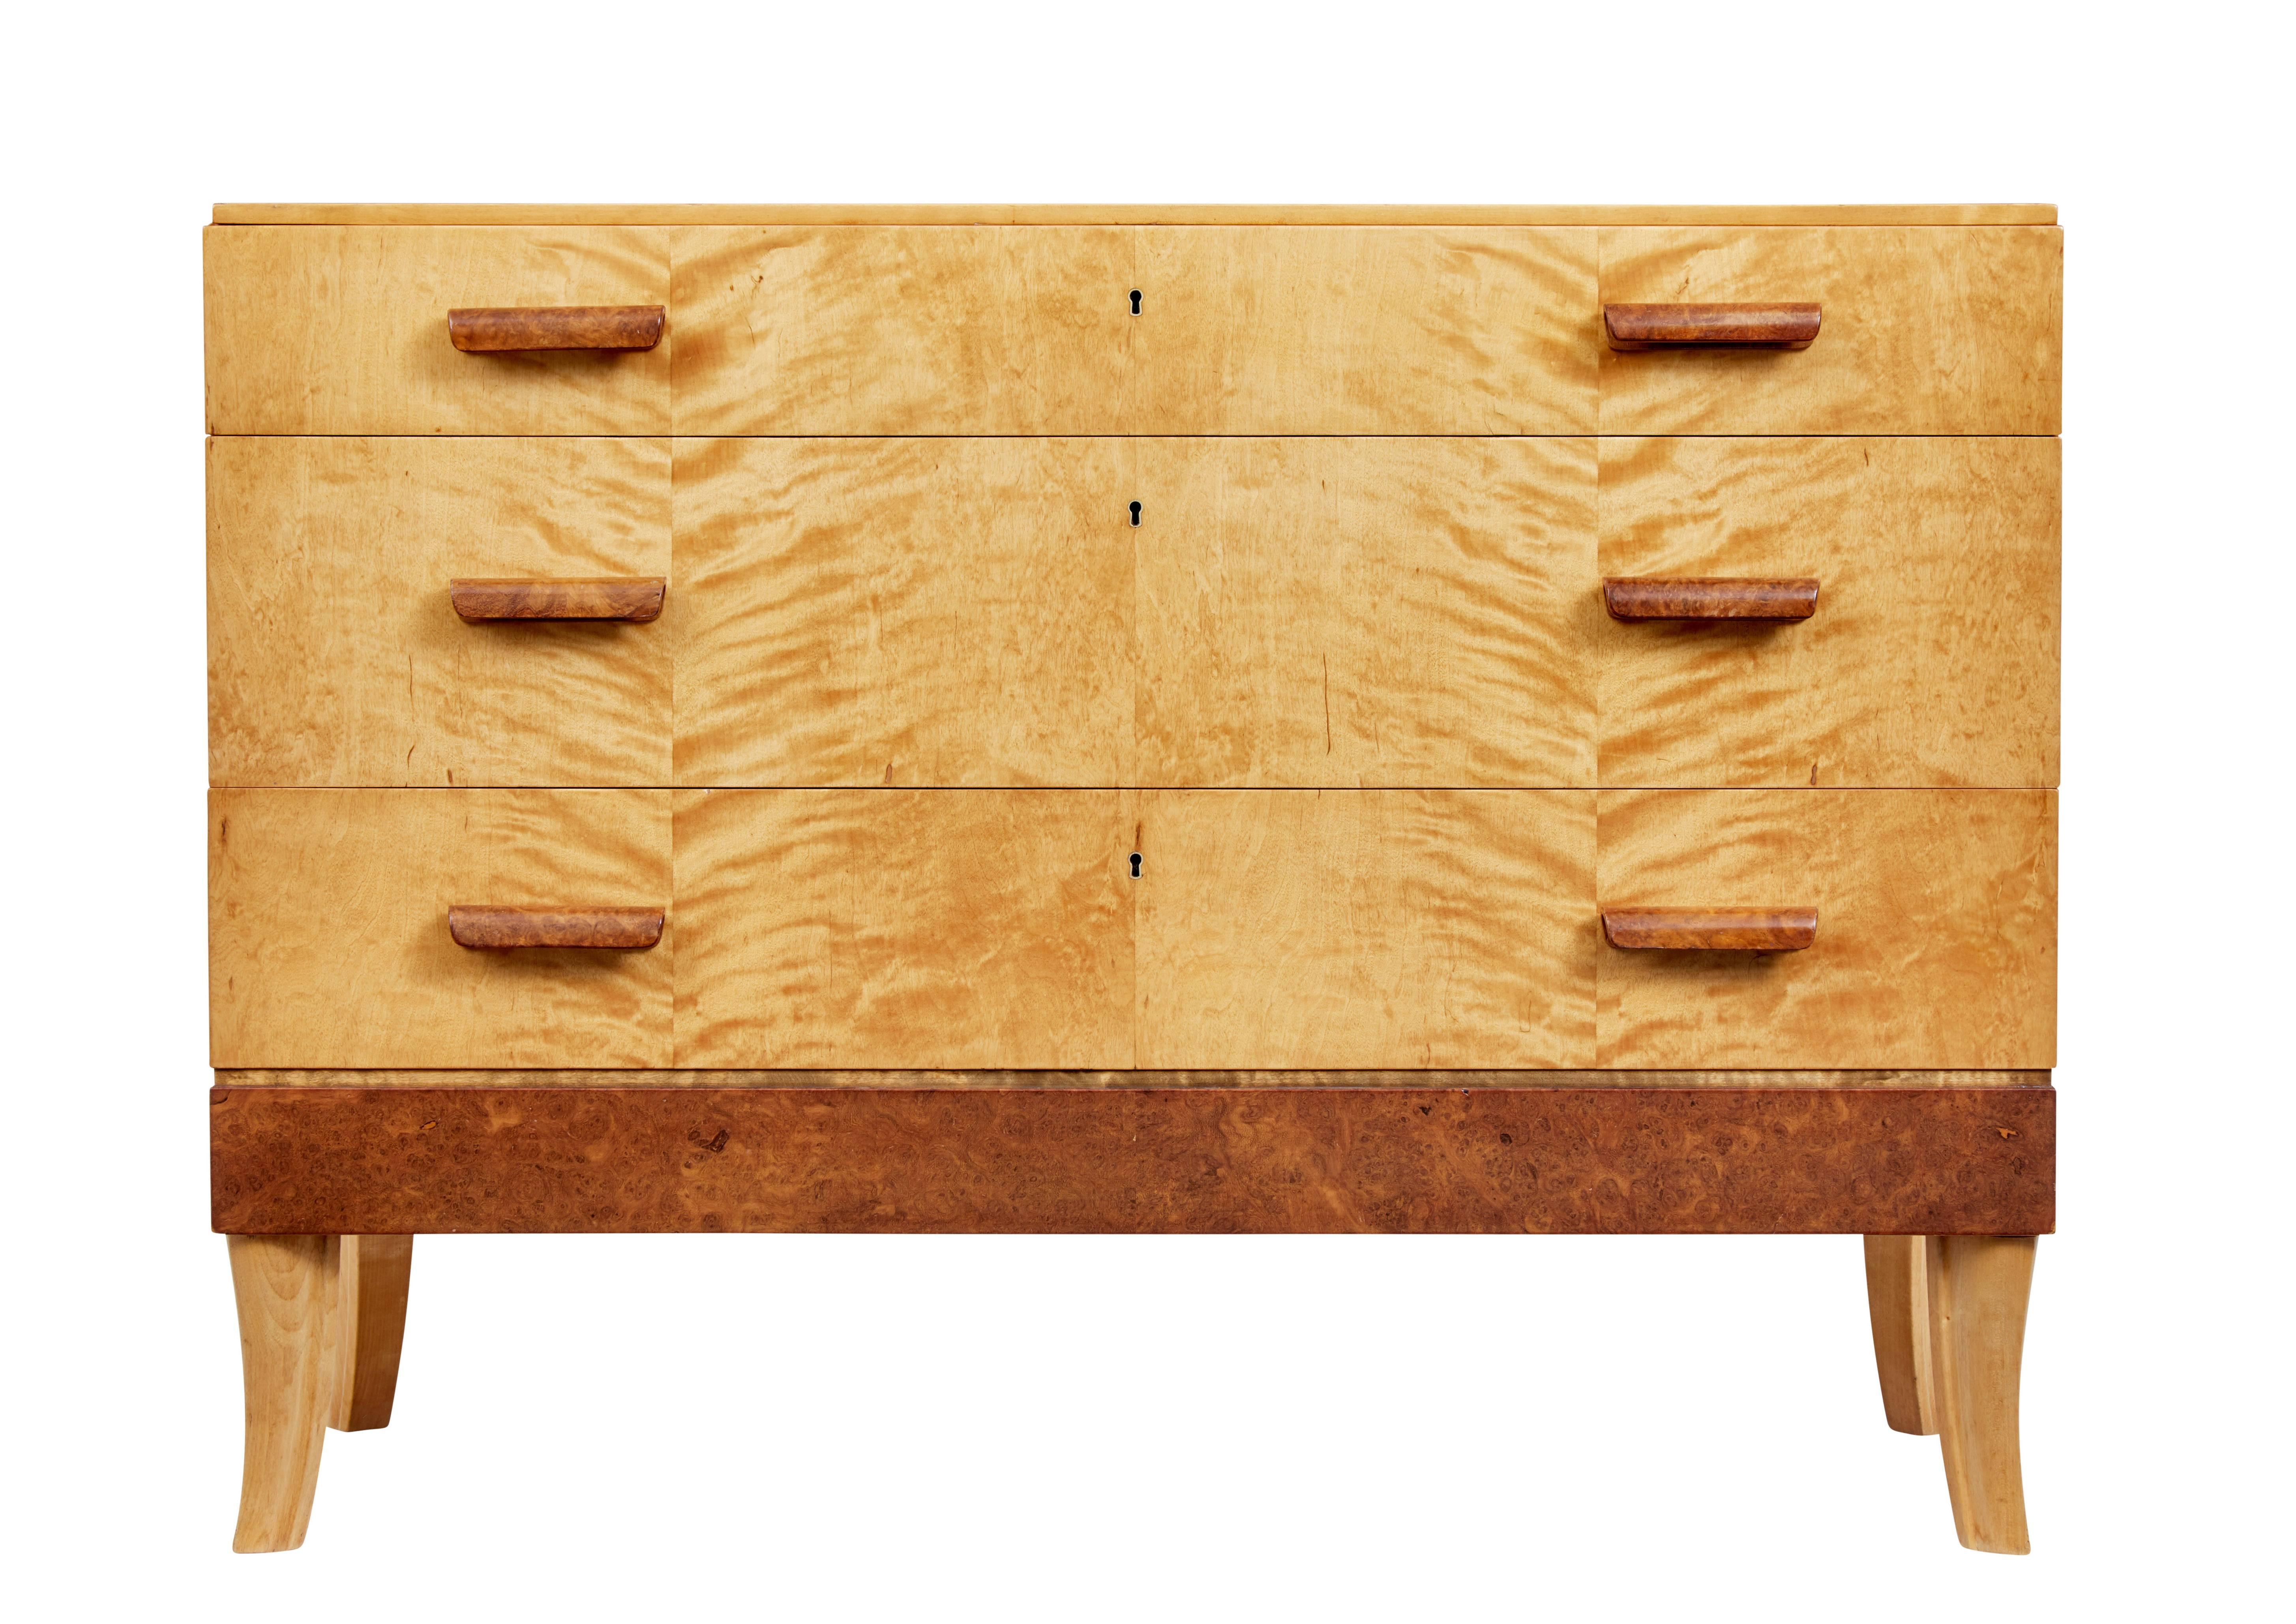 Delightful chest of drawers rich in the Art Deco taste, circa 1950.

Three drawers fitted with burr shaped handles, top drawer fitted with partitions and fitted turned bowl for jewellery etc.

Handles and bottom burr panel add contrast to the